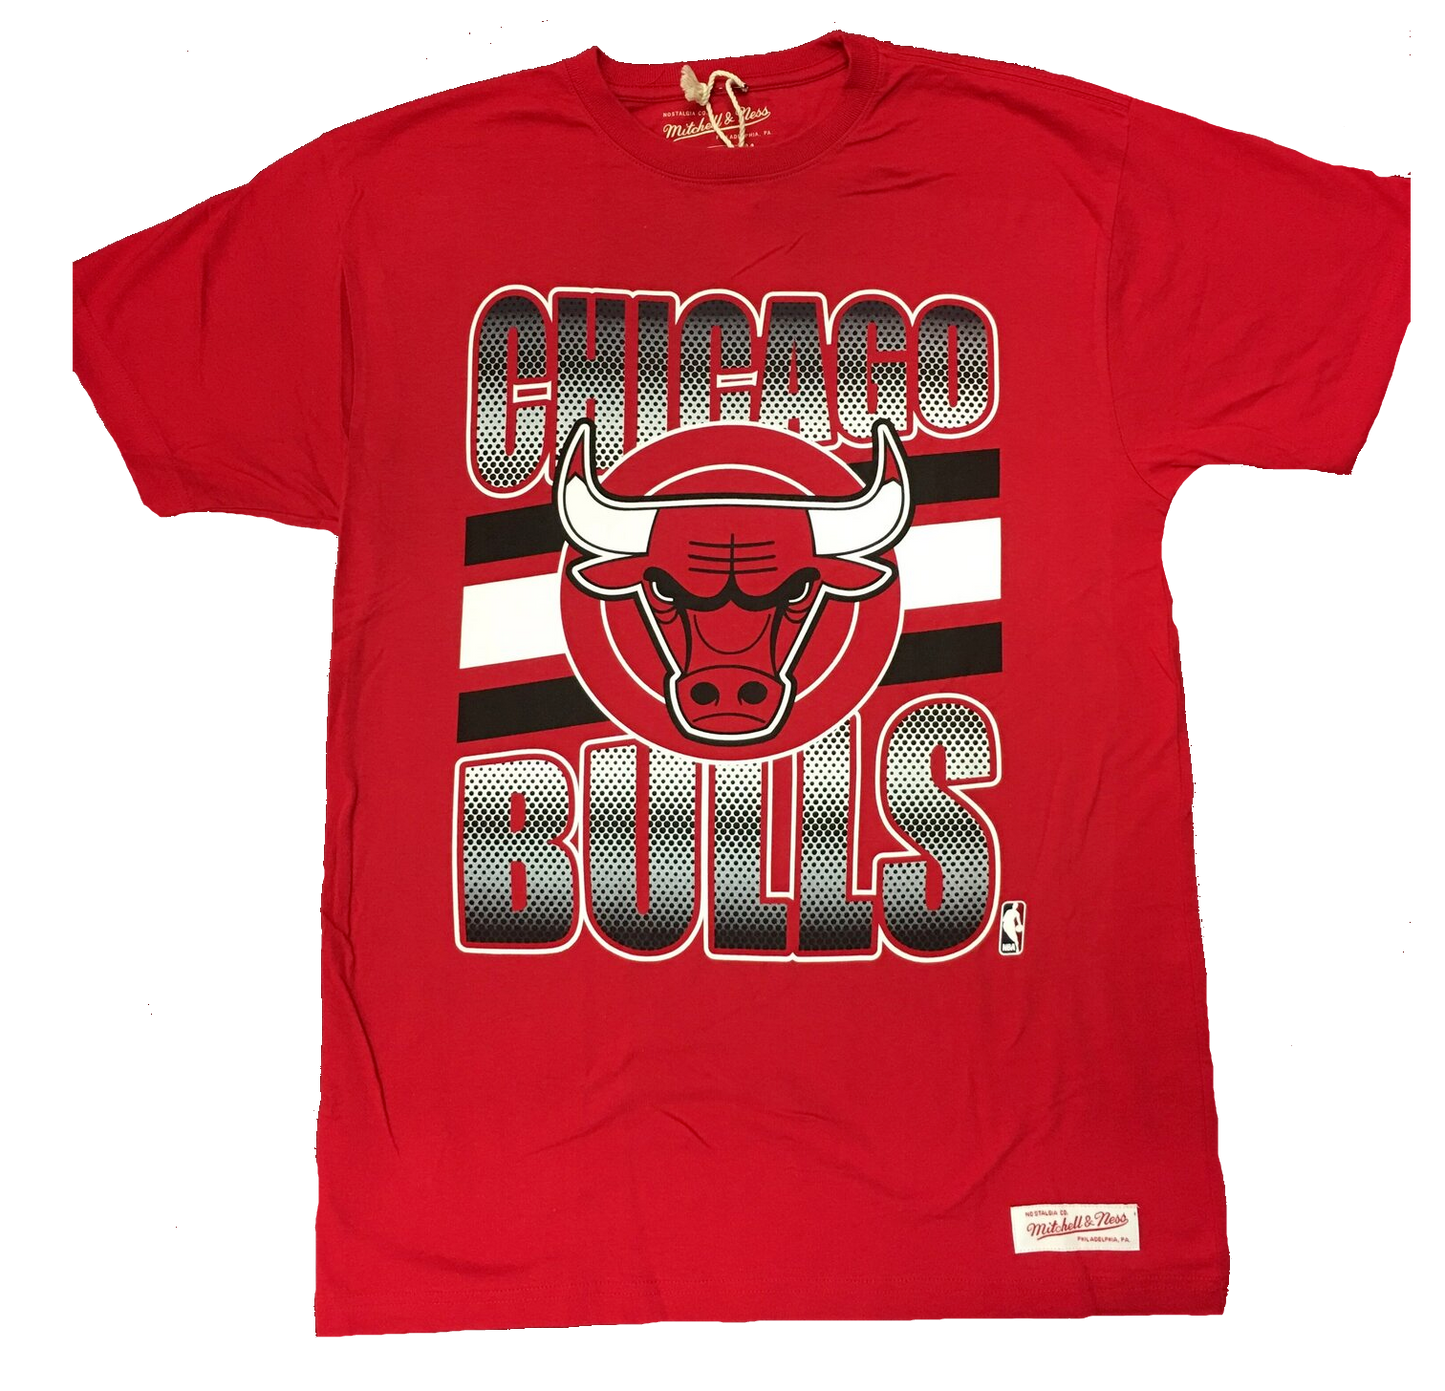 Mitchell & Ness Men's Chicago Bulls Red Traditional Tee